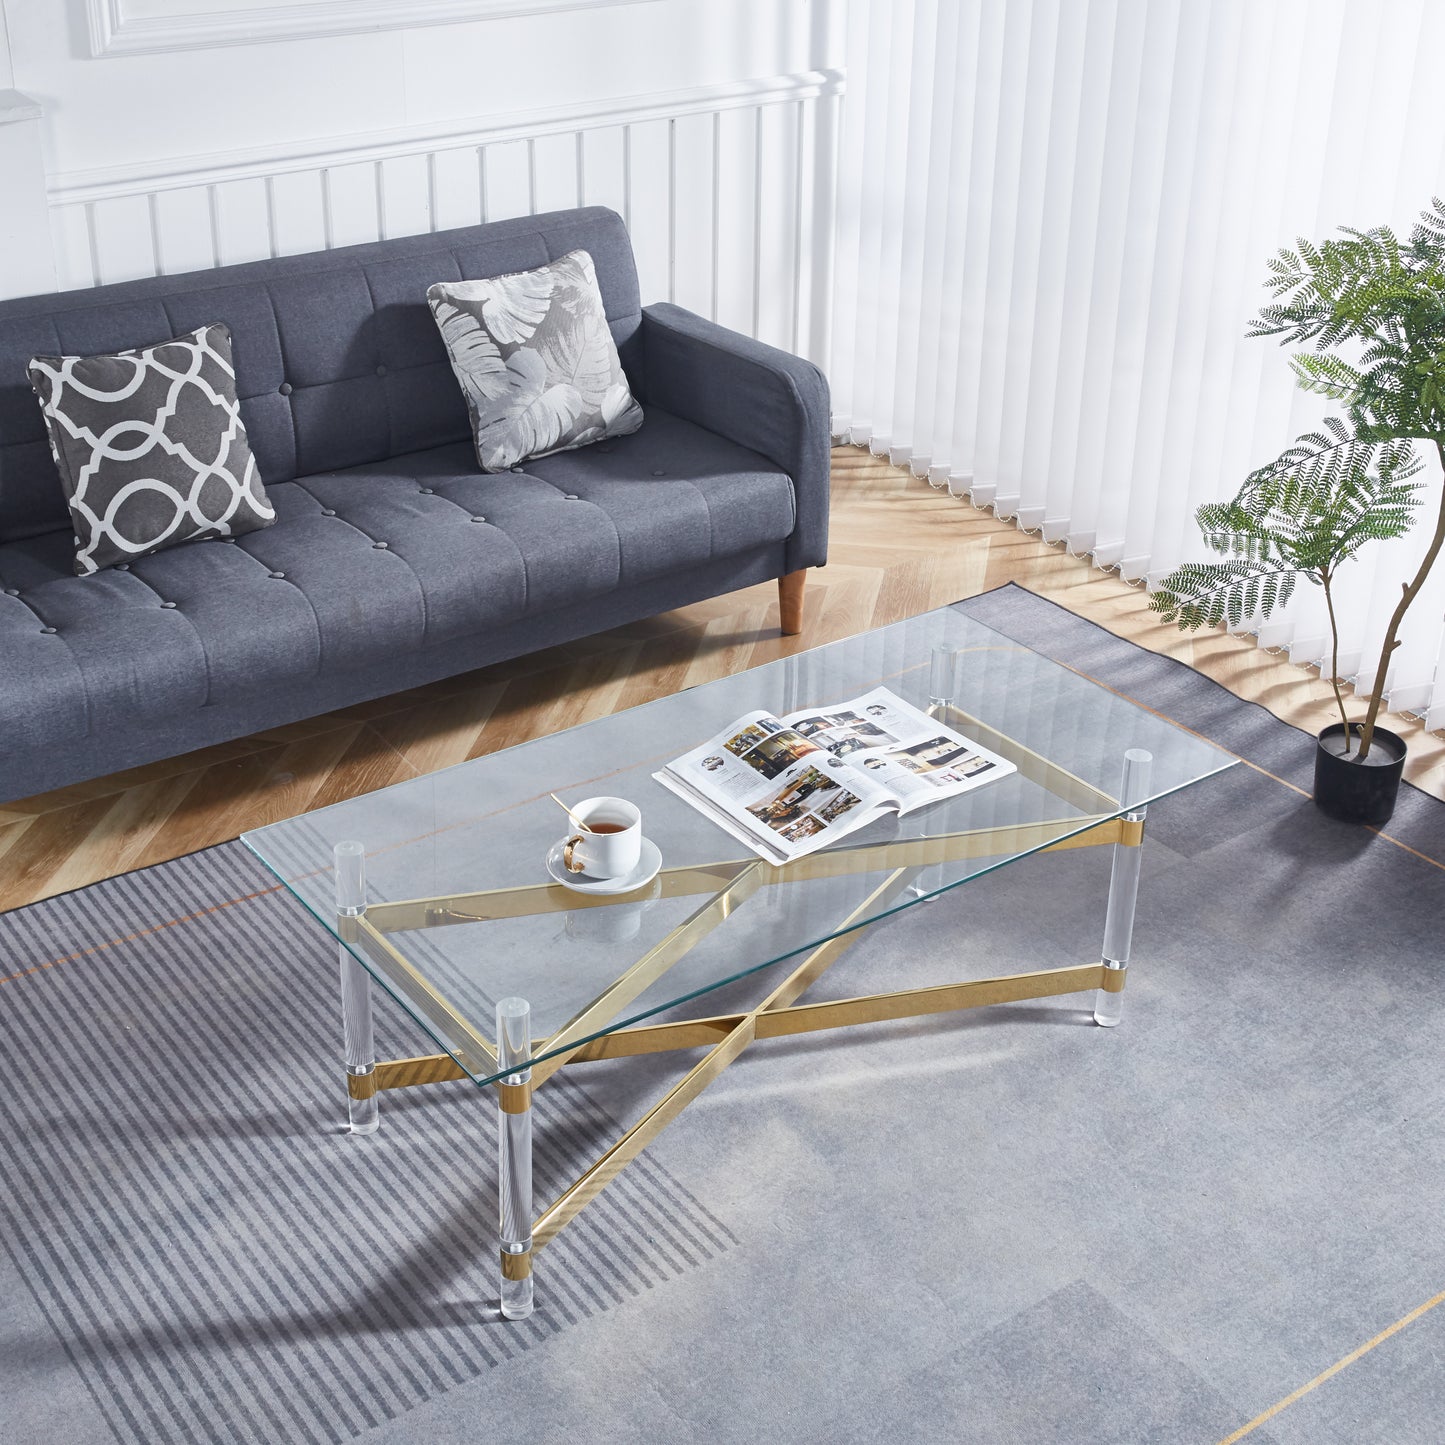 Gold Stainless Steel Coffee Table With Acrylic Frame and Clear Glass Top - Modern American Design (CS-1197)